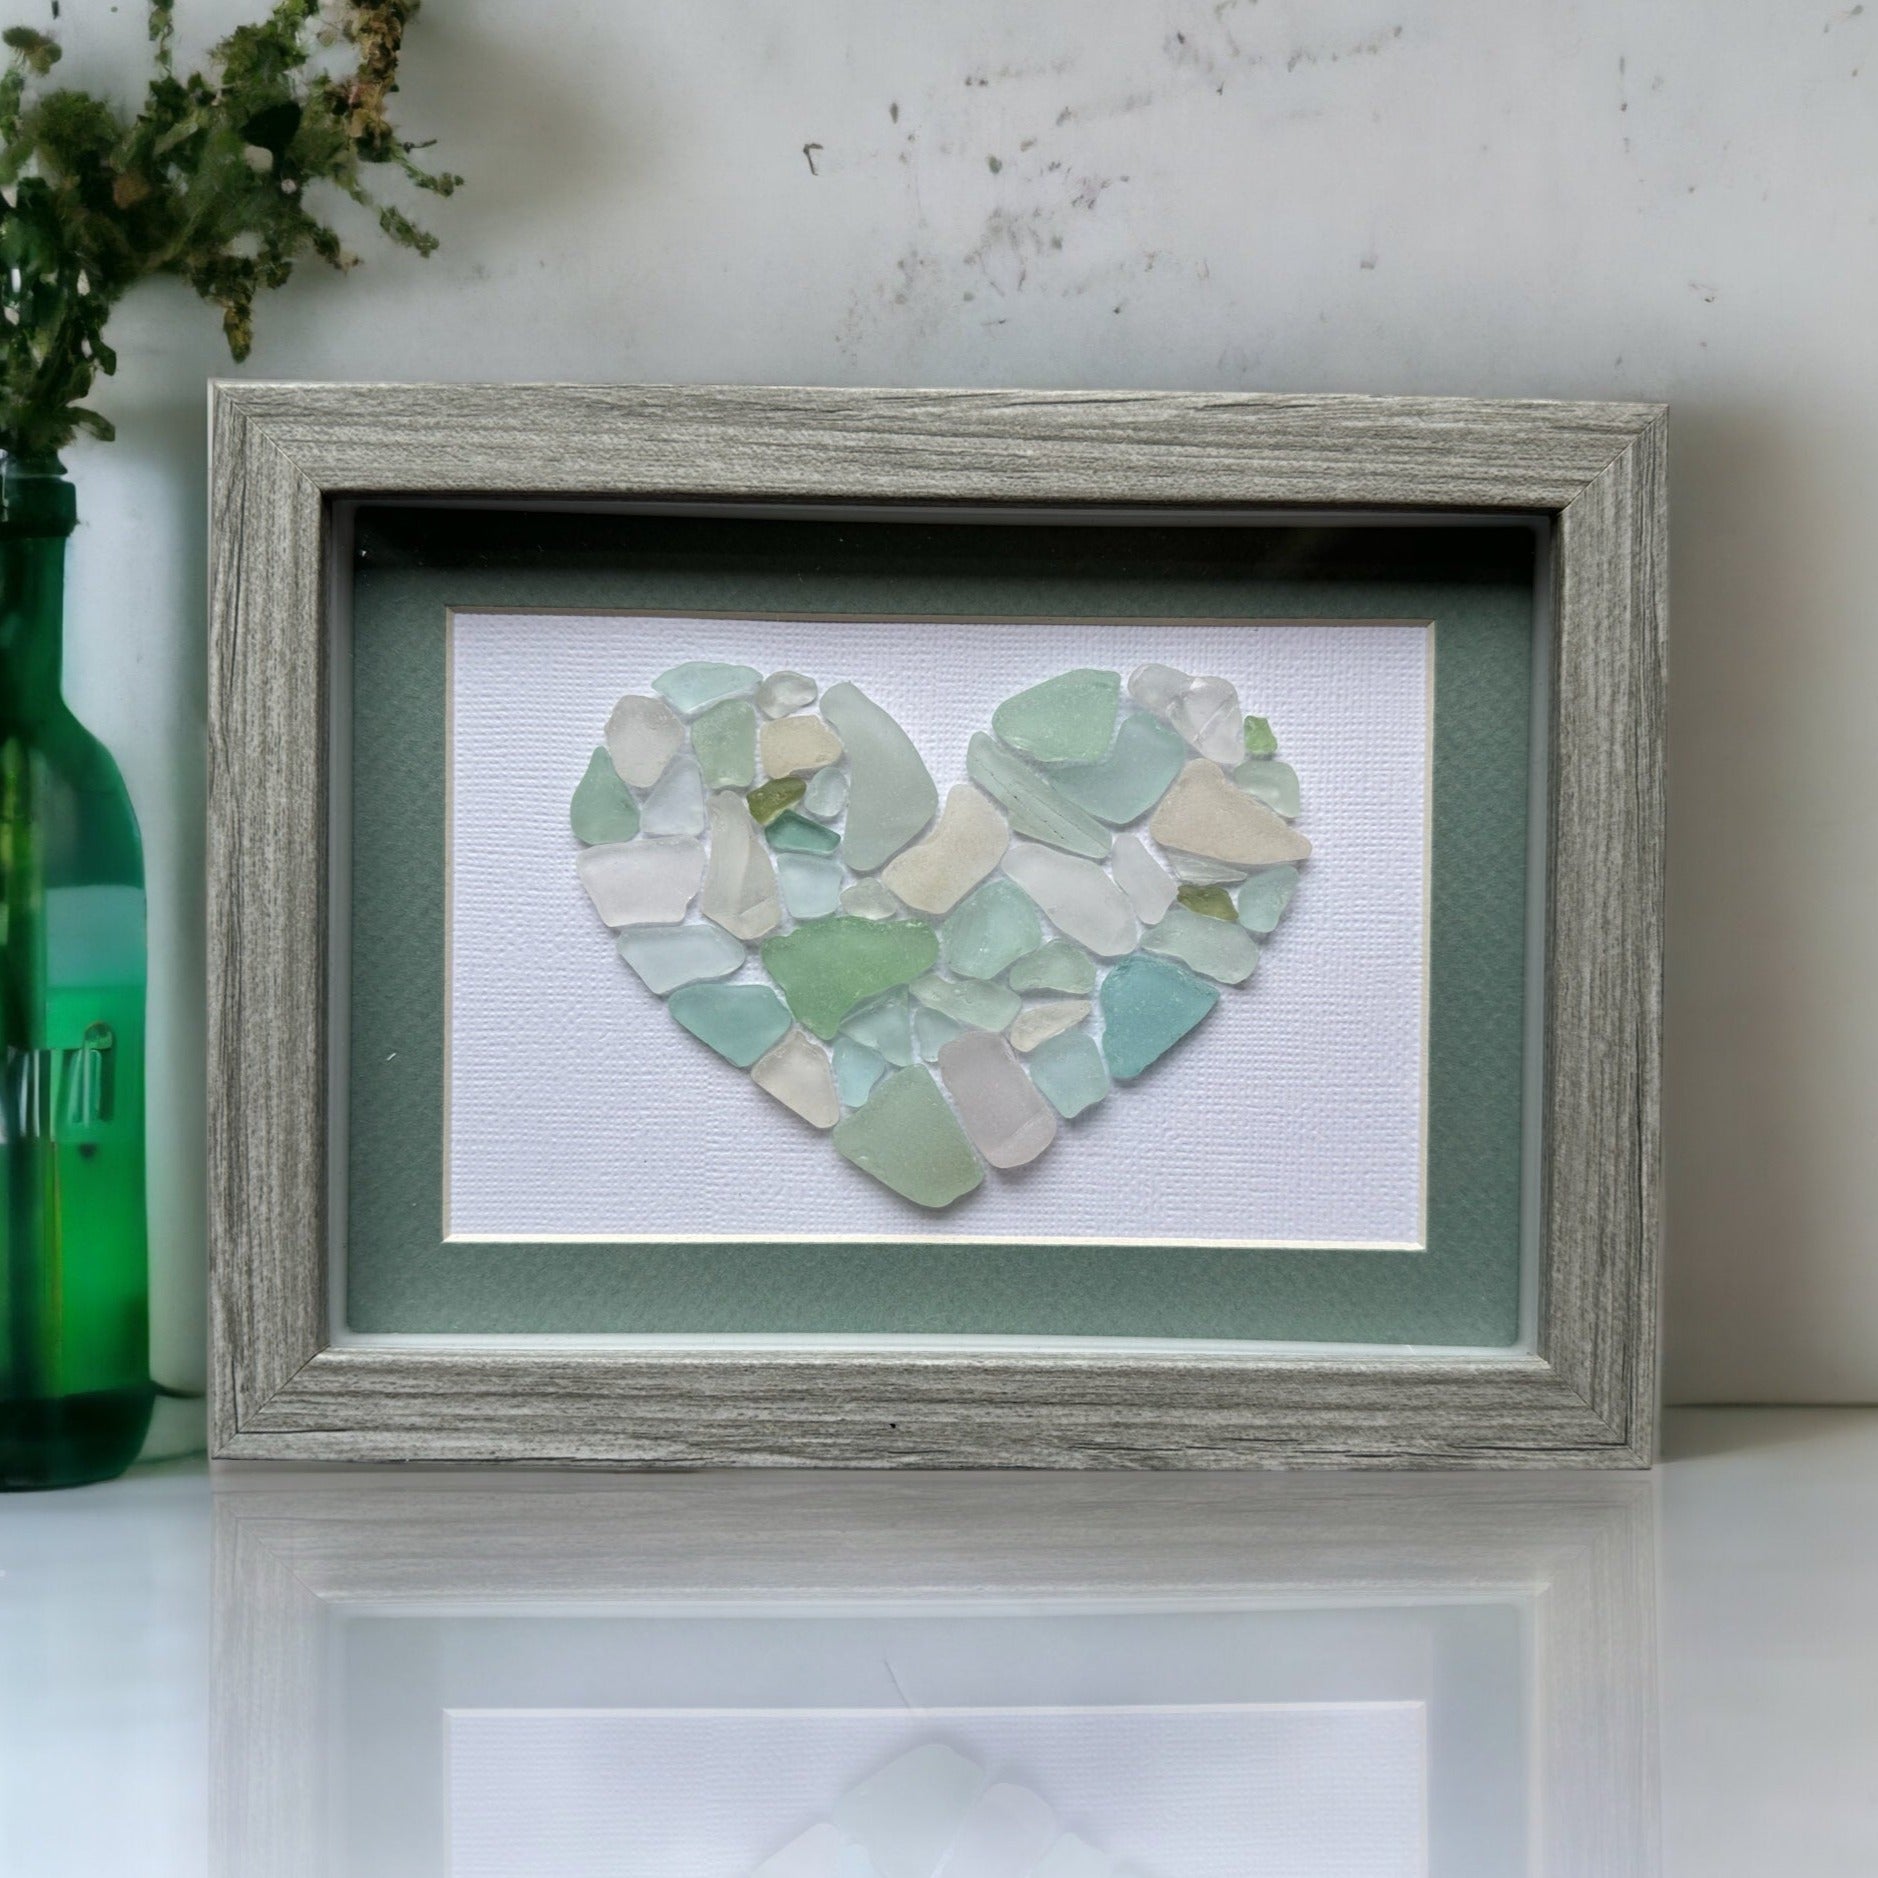 Shades of Blues and Greens Sea Glass Mosaic Picture Mixed Media Art